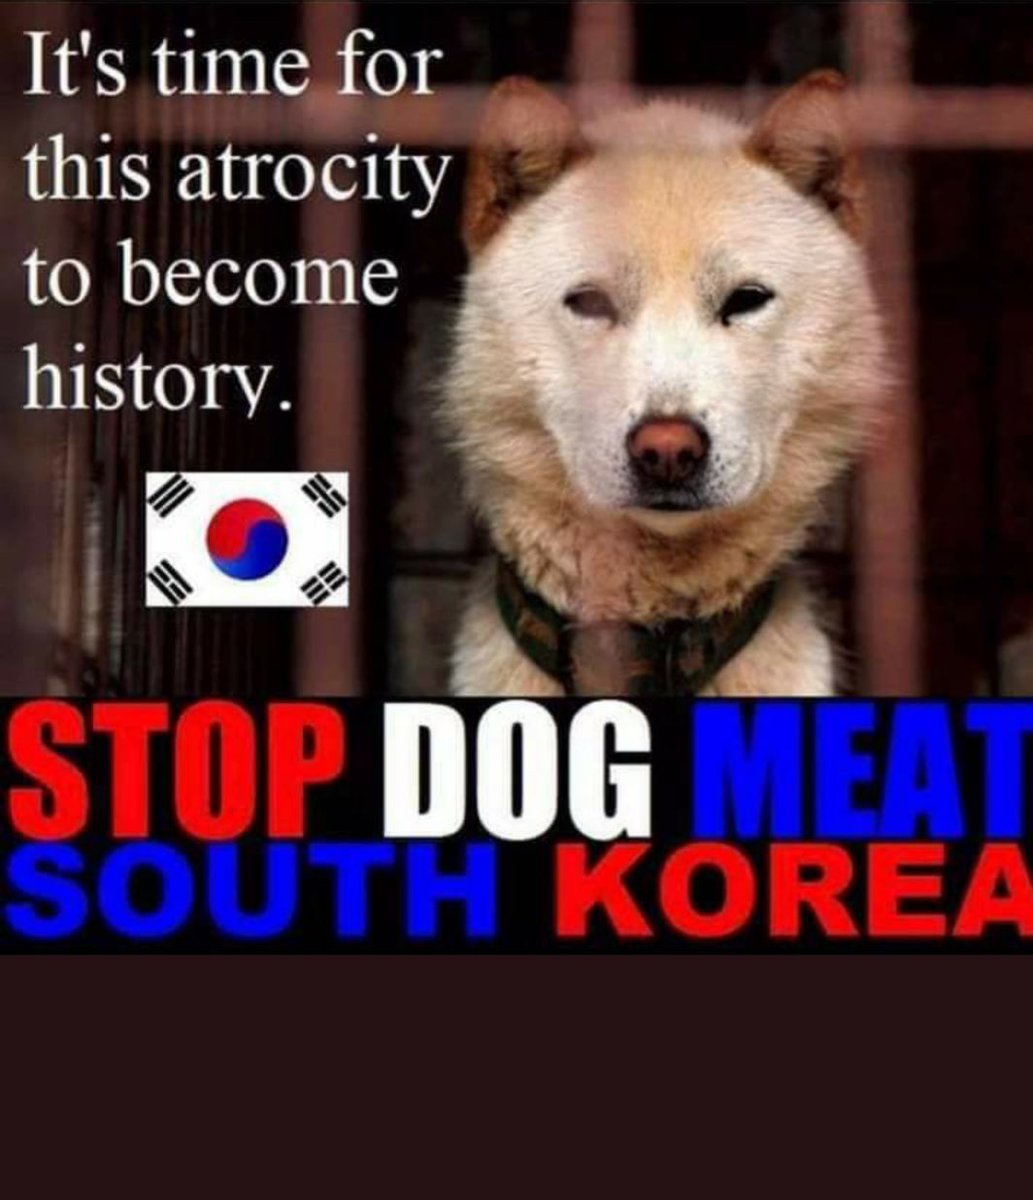 #southkorea ‘s New #president #Inauguration Day Today. Congratulations on your success President @sukyeol__yoon Thank you for voicing your opposition to the heinous #dogcatmeattrade operating within your country. The #dogcatmeattraders cast dark shadows upon your beautiful land.